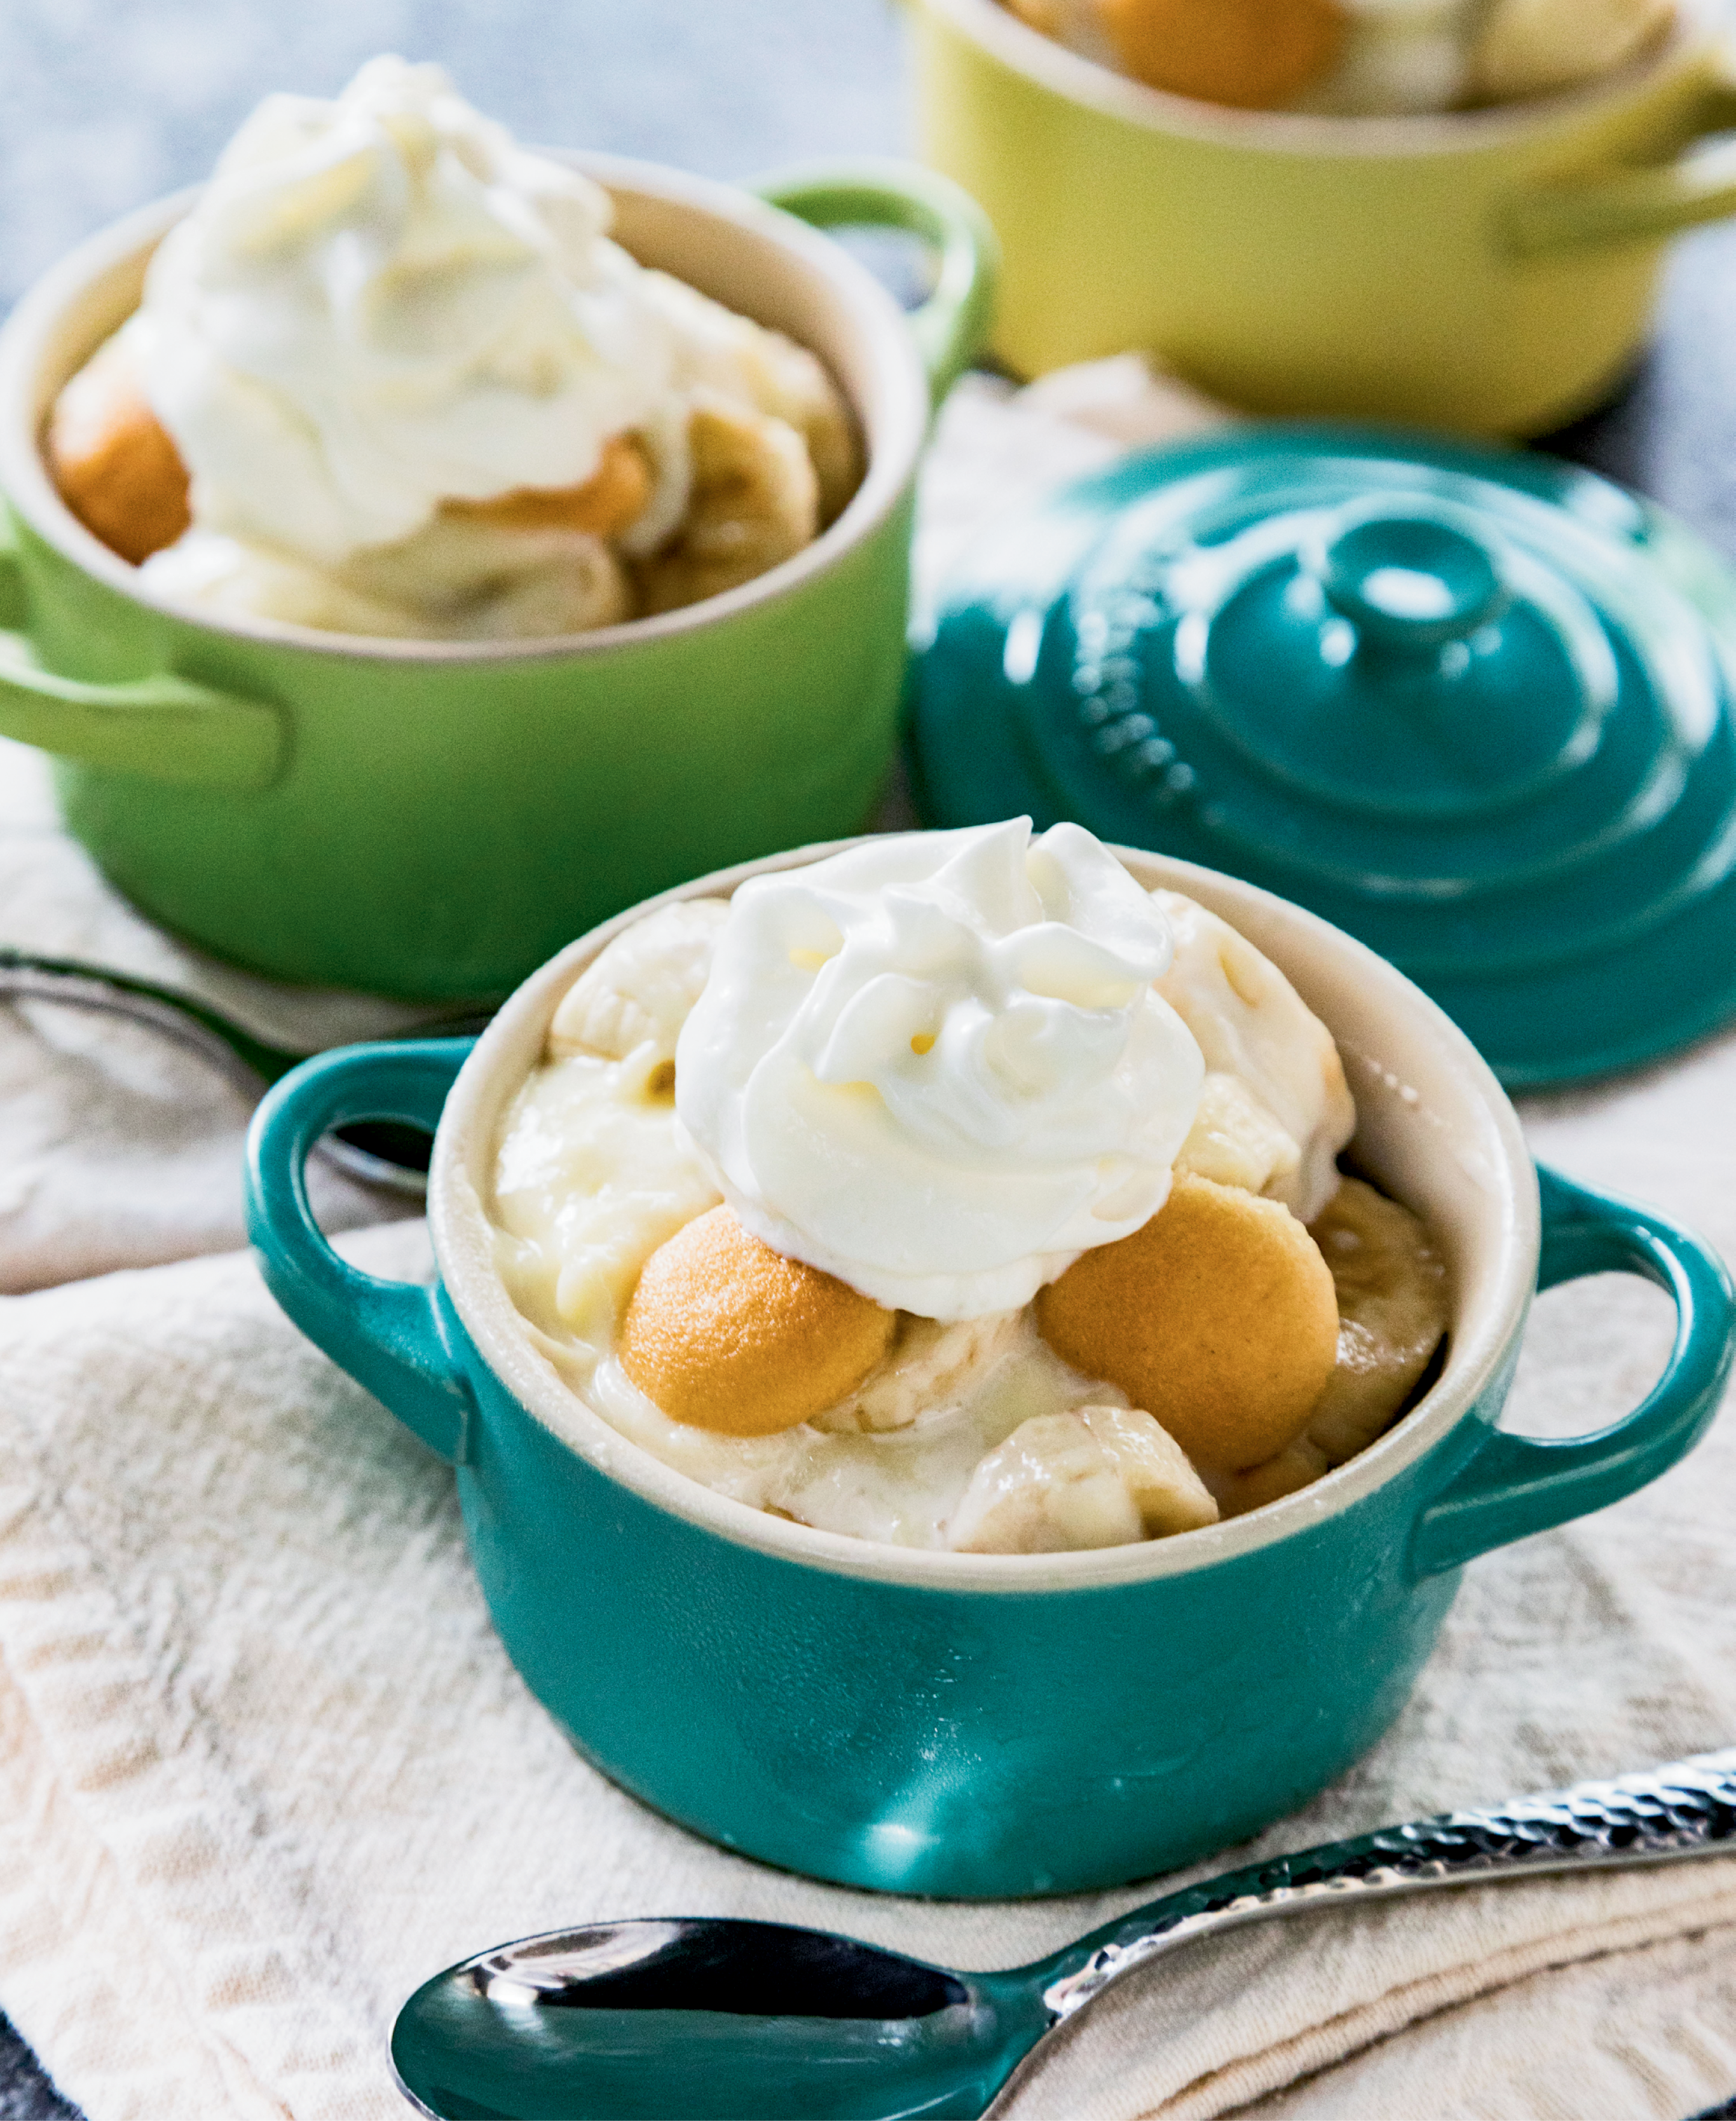 Classic banana pudding tastes like an indulgent dessert, but it’s also a sneaky way to add more fresh produce to the meal—there’s about one serving of fruit in each portion!